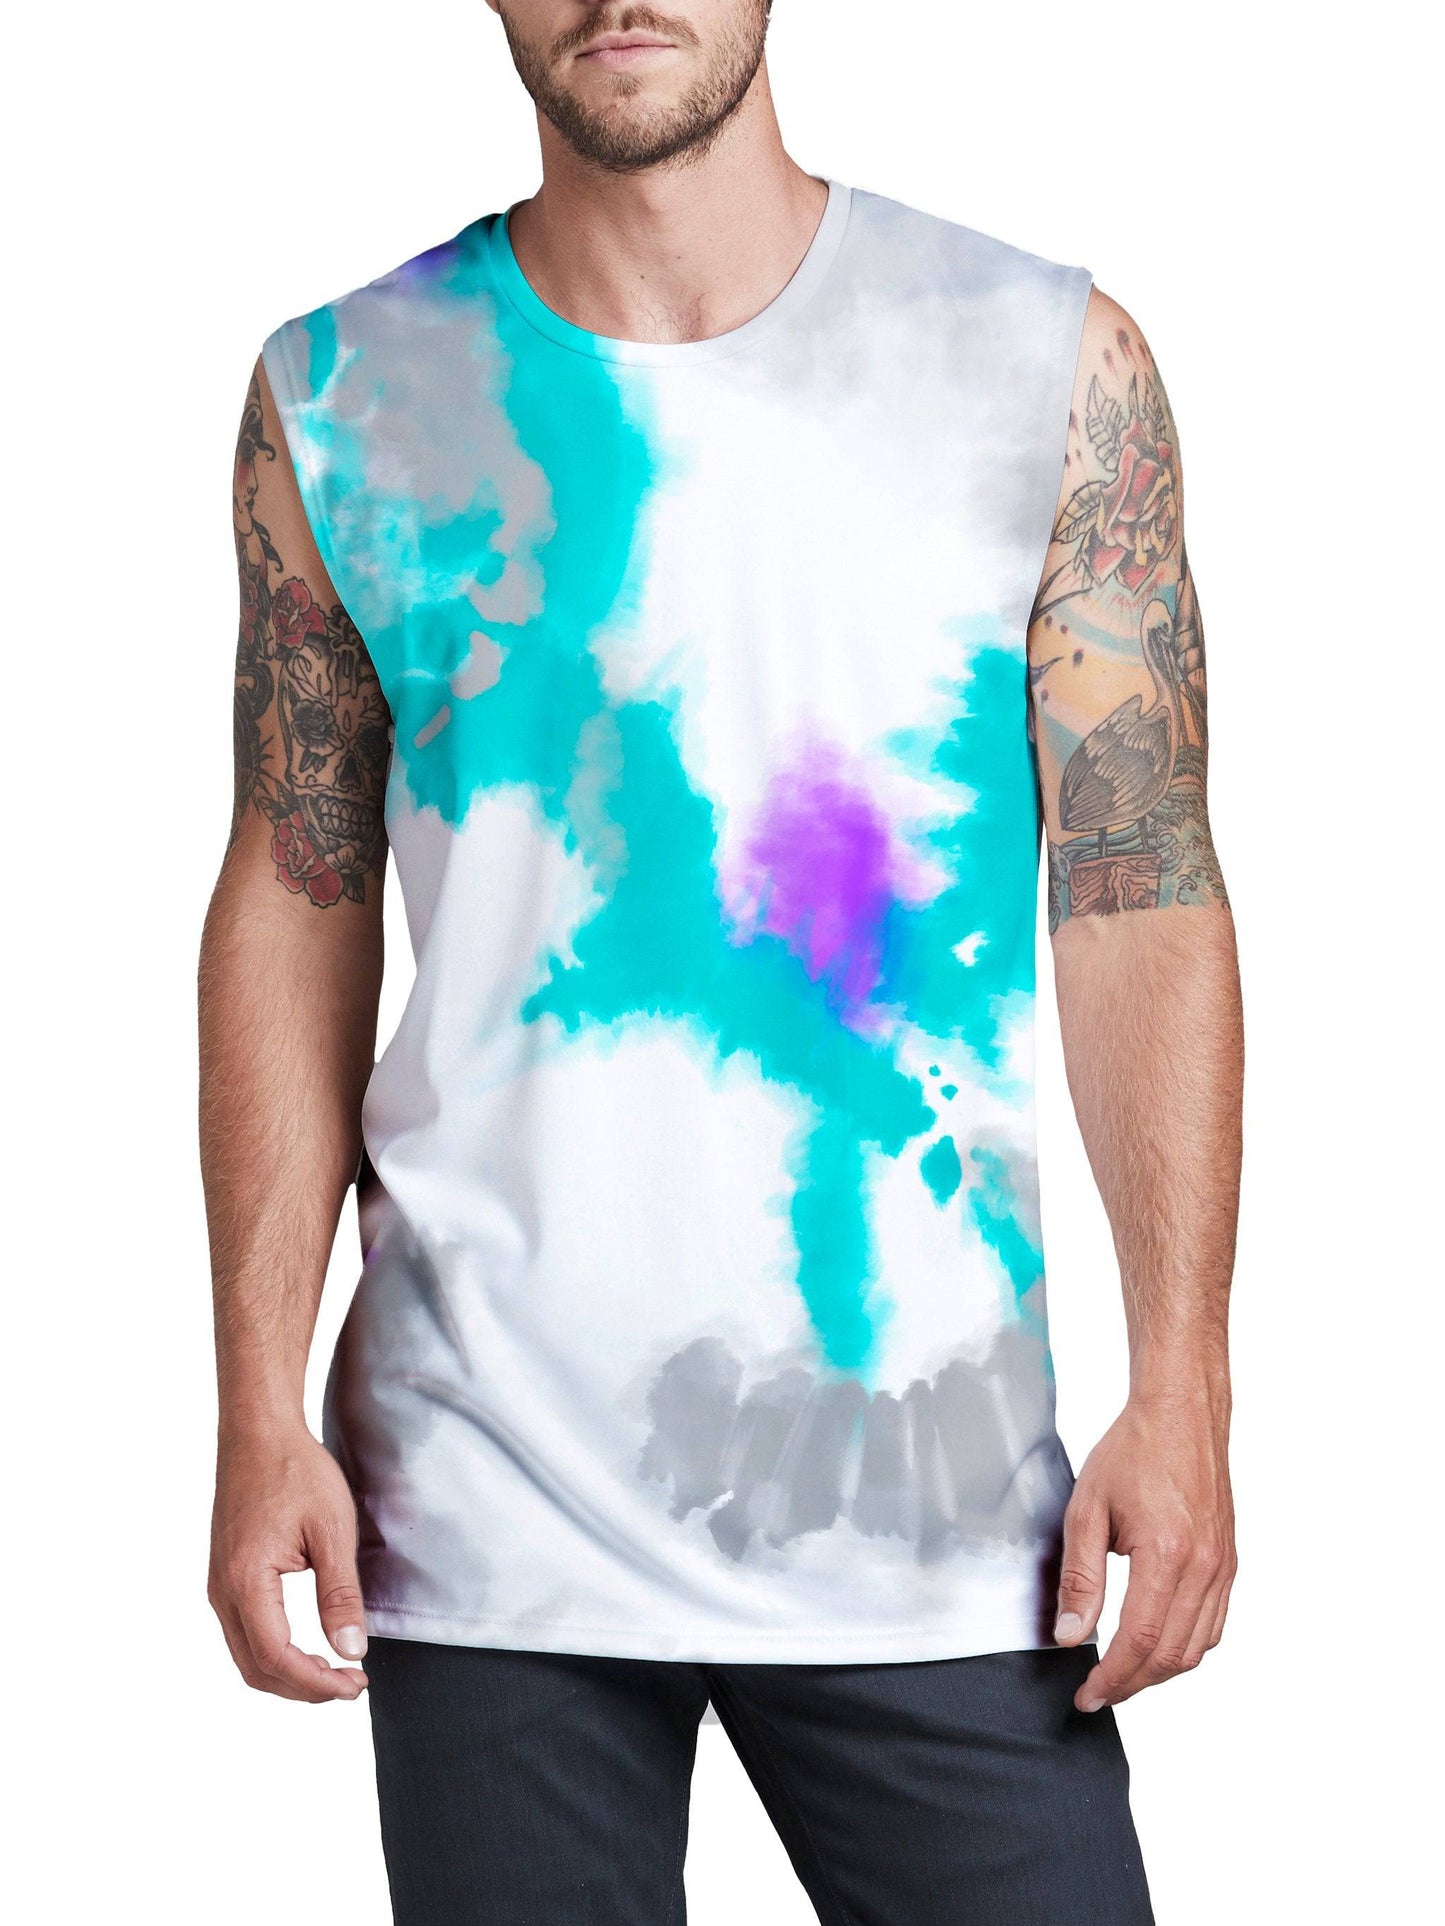 90s Filtered Men's Muscle Tank, iEDM, | iEDM